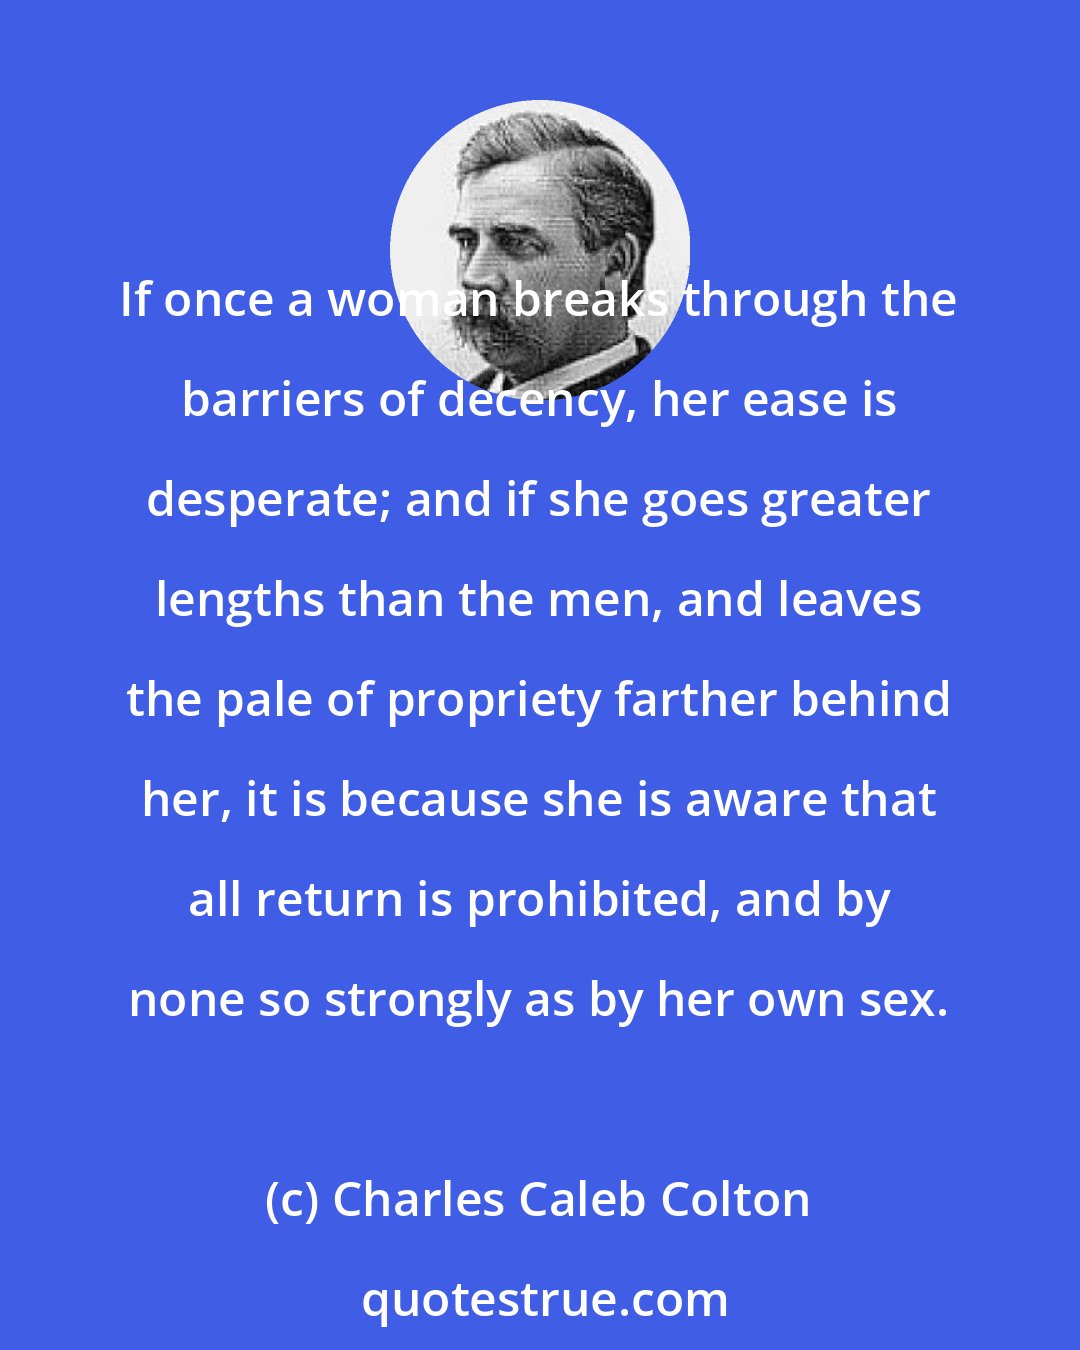 Charles Caleb Colton: If once a woman breaks through the barriers of decency, her ease is desperate; and if she goes greater lengths than the men, and leaves the pale of propriety farther behind her, it is because she is aware that all return is prohibited, and by none so strongly as by her own sex.